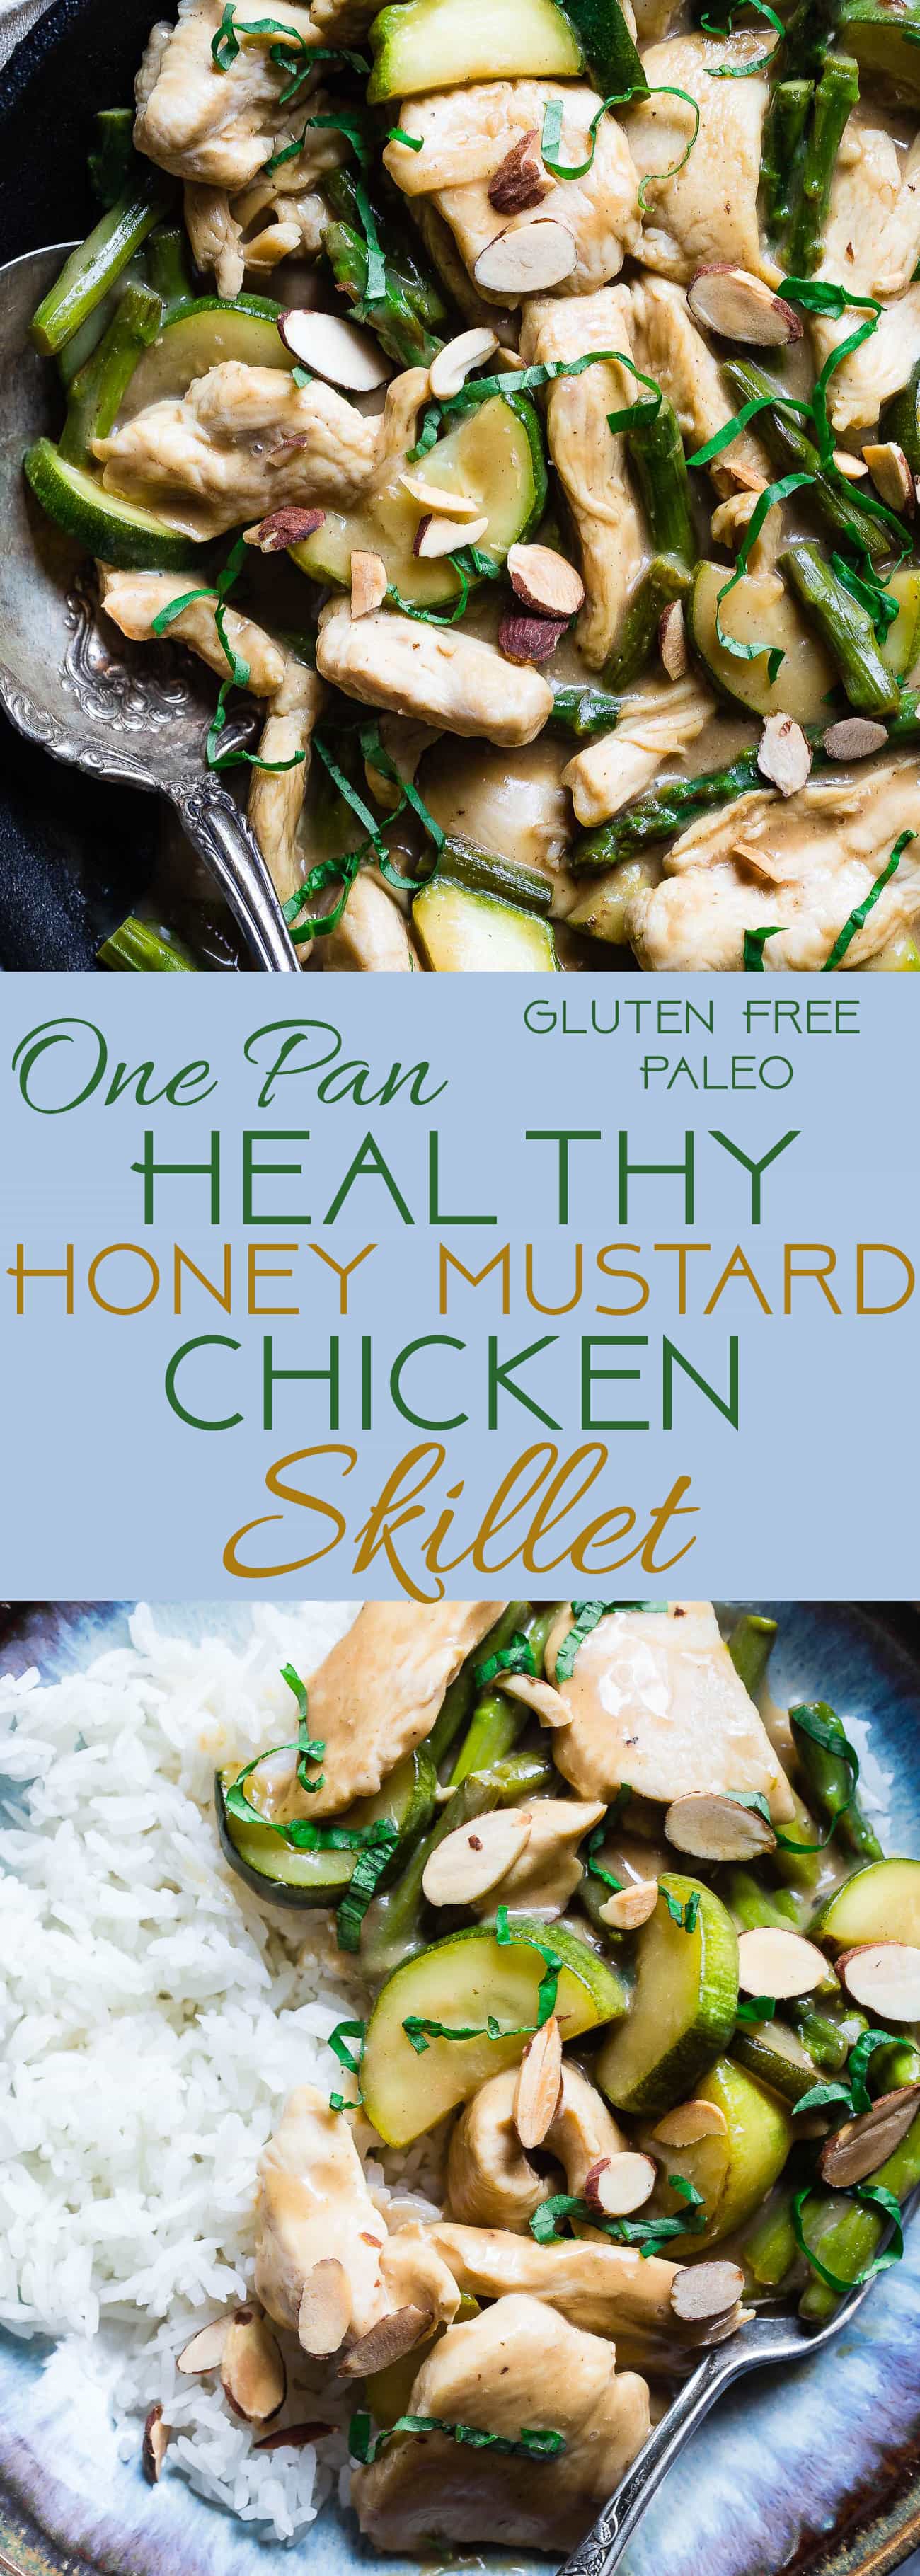 Easy Honey Mustard Chicken Skillet -  This paleo friendly chicken skillet is quick, easy and healthy! It's kid-friendly, 30 minute meal that makes great leftovers and perfect for busy weeknights! | Foodfaithfitness.com | @FoodFaithFit | Healthy honey mustard chicken. healthy chicken recipes. paleo chicken recipes. kid friendly dinners. one pot meals. 30 min meals.